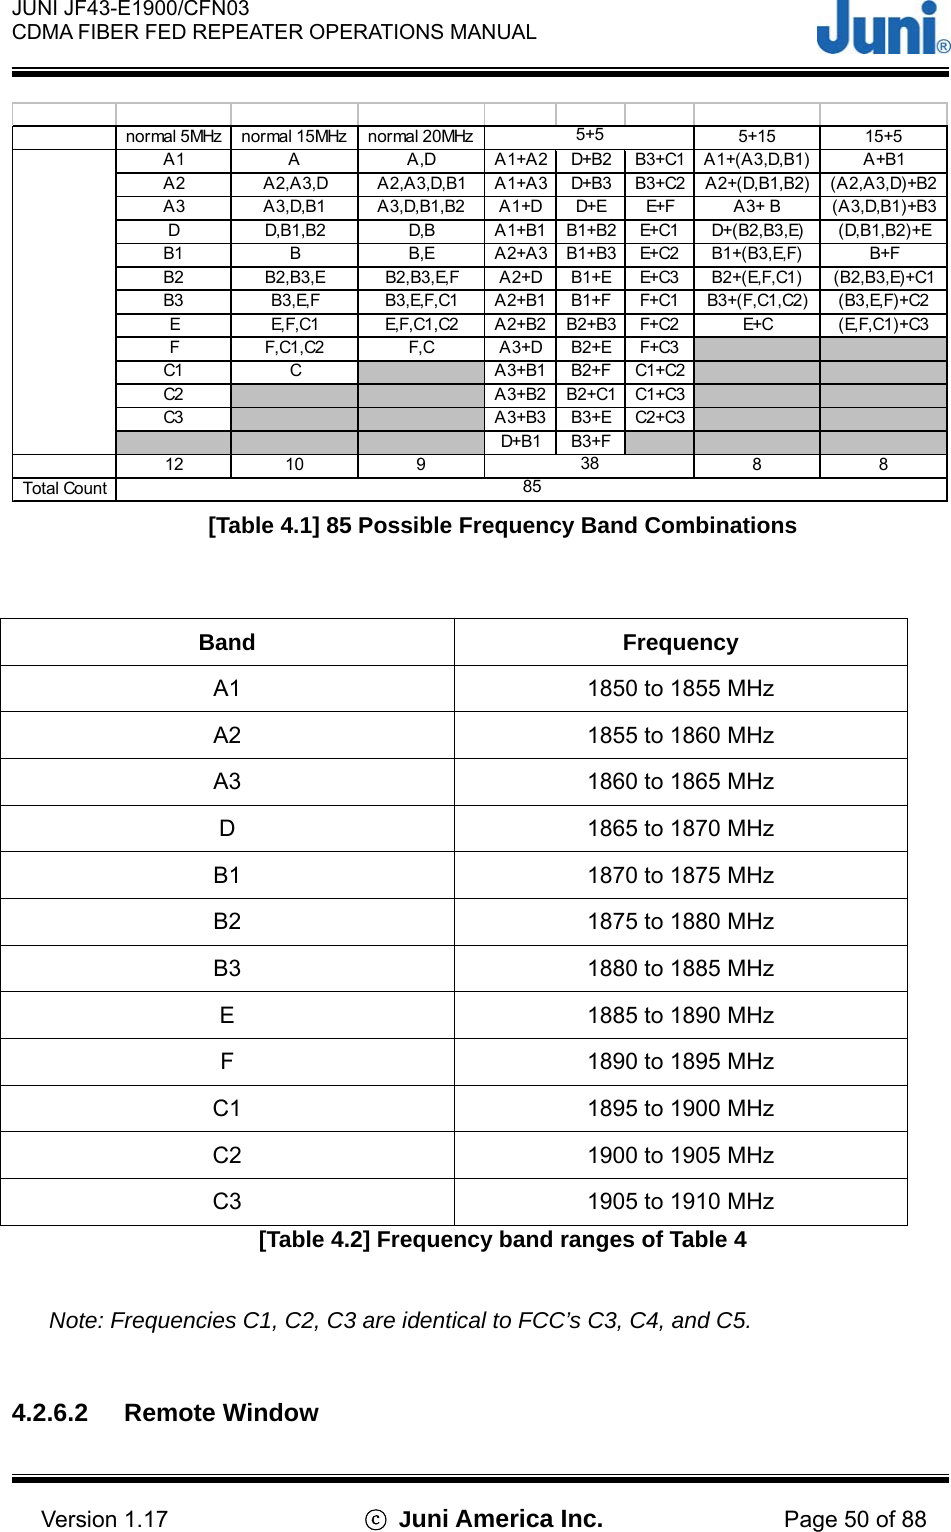  JUNI JF43-E1900/CFN03 CDMA FIBER FED REPEATER OPERATIONS MANUAL                                    Version 1.17  ⓒ Juni America Inc. Page 50 of 88  [Table 4.1] 85 Possible Frequency Band Combinations    Band Frequency A1 1850 to 1855 MHz A2  1855 to 1860 MHz A3  1860 to 1865 MHz D  1865 to 1870 MHz B1  1870 to 1875 MHz B2  1875 to 1880 MHz B3  1880 to 1885 MHz E  1885 to 1890 MHz F  1890 to 1895 MHz C1  1895 to 1900 MHz C2  1900 to 1905 MHz C3  1905 to 1910 MHz [Table 4.2] Frequency band ranges of Table 4  Note: Frequencies C1, C2, C3 are identical to FCC’s C3, C4, and C5.  4.2.6.2 Remote Window normal 5MHz normal 15MHz normal 20MHz 5+15 15+5A1 A A,D A1+A2 D+B2 B3+C1 A1+(A3,D,B1) A+B1A2 A2,A3,D A2,A3,D,B1 A1+A3 D+B3 B3+C2 A2+(D,B1,B2) (A2,A3,D)+B2A3 A3,D,B1 A3,D,B1,B2 A1+D D+E E+F A3+ B (A3,D,B1)+B3D D,B1,B2 D,B A1+B1 B1+B2 E+C1 D+(B2,B3,E) (D,B1,B2)+EB1 B B,E A2+A 3 B1+B3 E+C2 B1+(B3,E,F) B+FB2 B2,B3,E B2,B3,E,F A2+D B1+E E+C3 B2+(E,F,C1) (B2,B3,E)+C1B3 B3,E,F B3,E,F,C1 A2+B1 B1+F F+C1 B3+(F,C1,C2) (B3,E,F)+C2E E,F,C1 E,F,C1,C2 A2+B2 B2+B3 F+C2 E+C (E,F,C1)+C3F F,C1,C2 F,C A3+D B2+E F+C3C1 C A 3+B1 B2+F C1+C2C2 A 3+B2 B2+C1 C1+C3C3 A3+B3 B3+E C2+C3D+B1 B3+F12 10 9 8 8Total Count5+53885